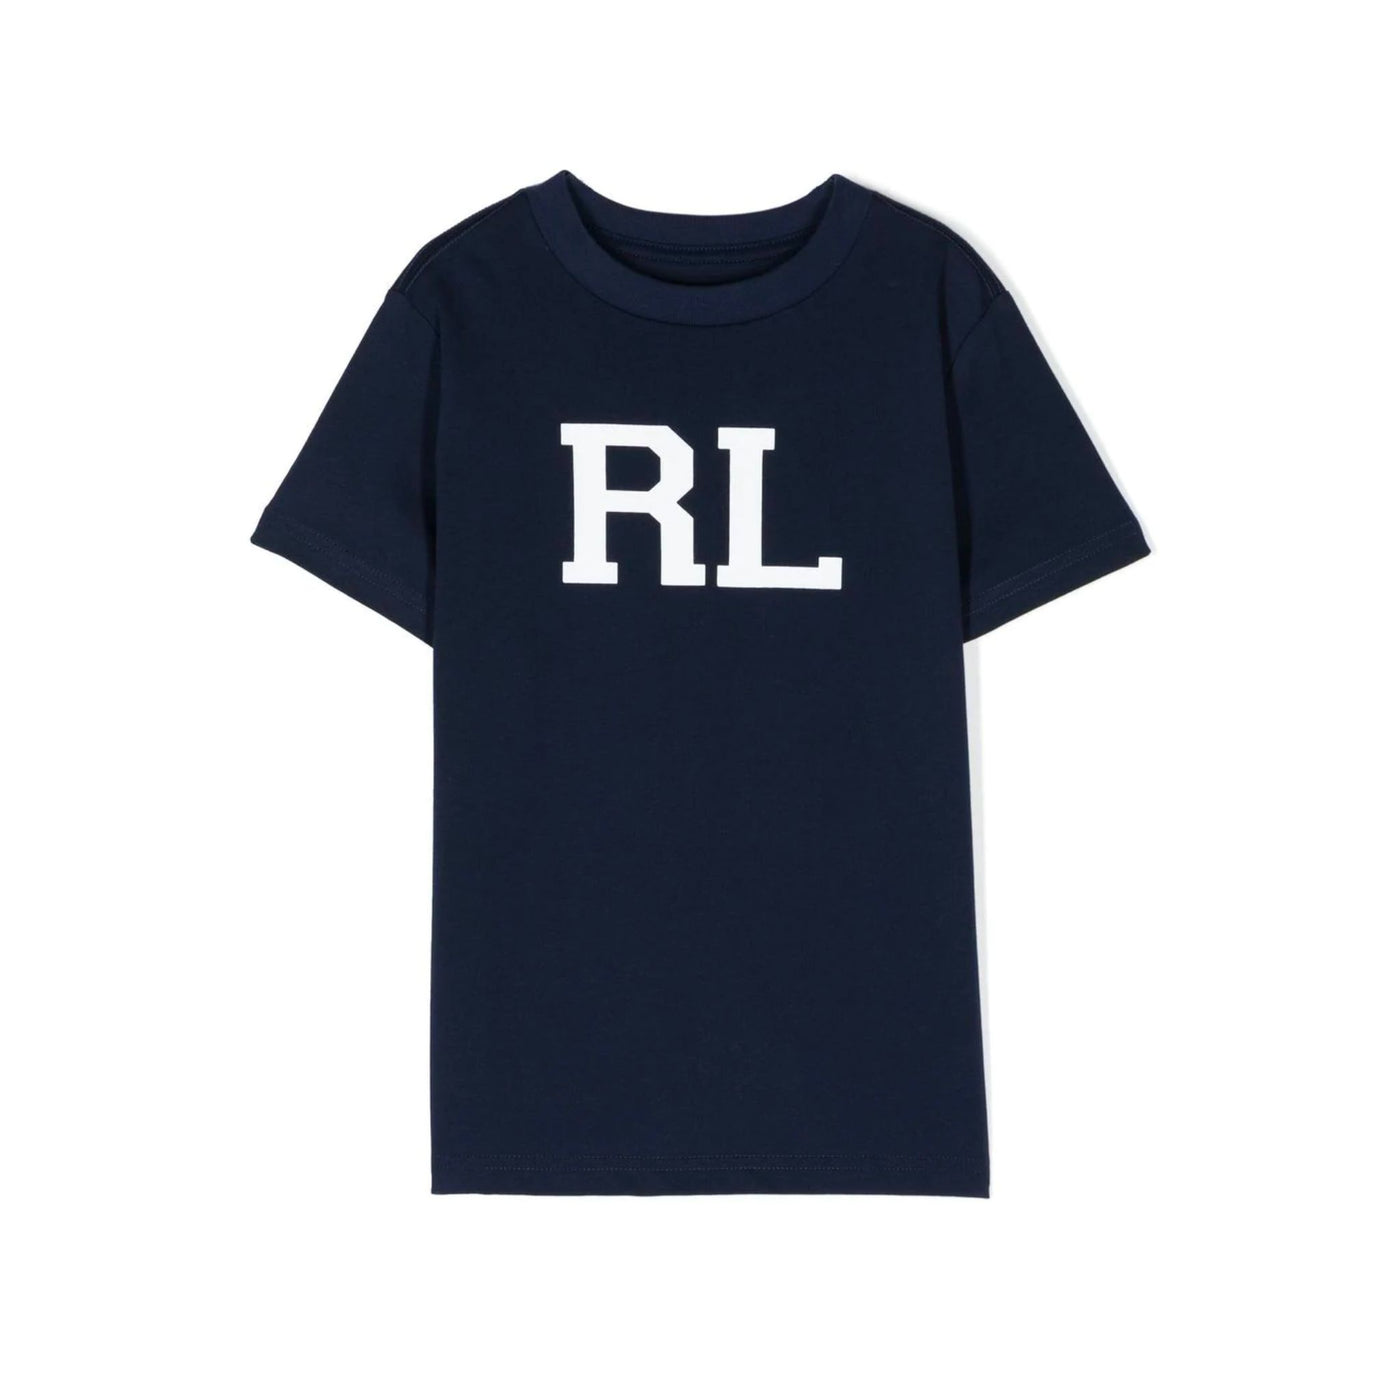 Boy 5-7 years T-shirt with large logo